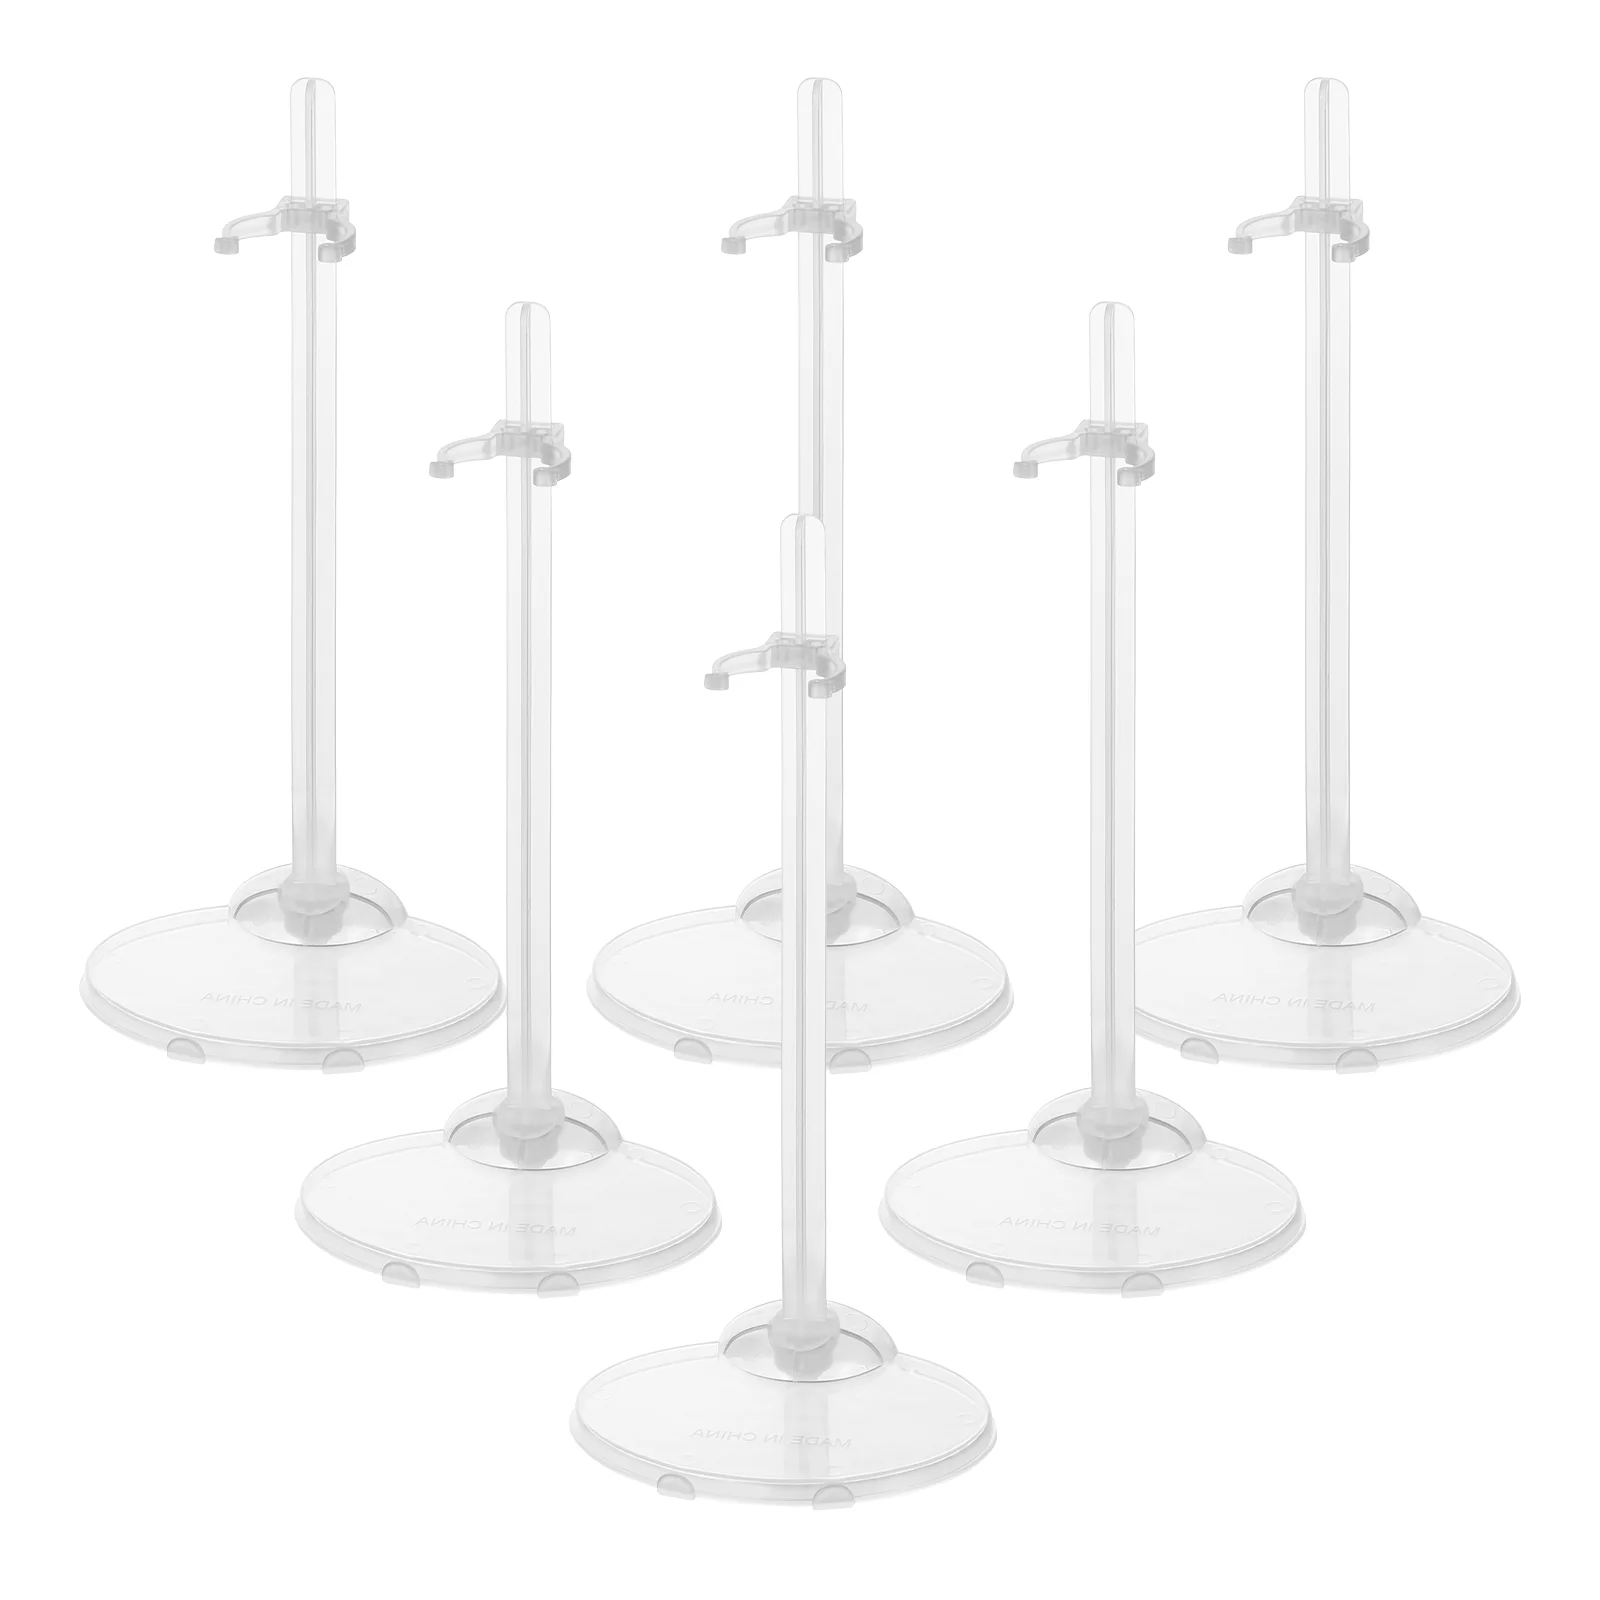 Doll Holding Stand Doll Support Display Rack Adjustable Transparent Model Furniture Plastic Mannequin Dolls Accessories vacuum cleaner storage rack plastic material vacuum cleaner accessories new dropship